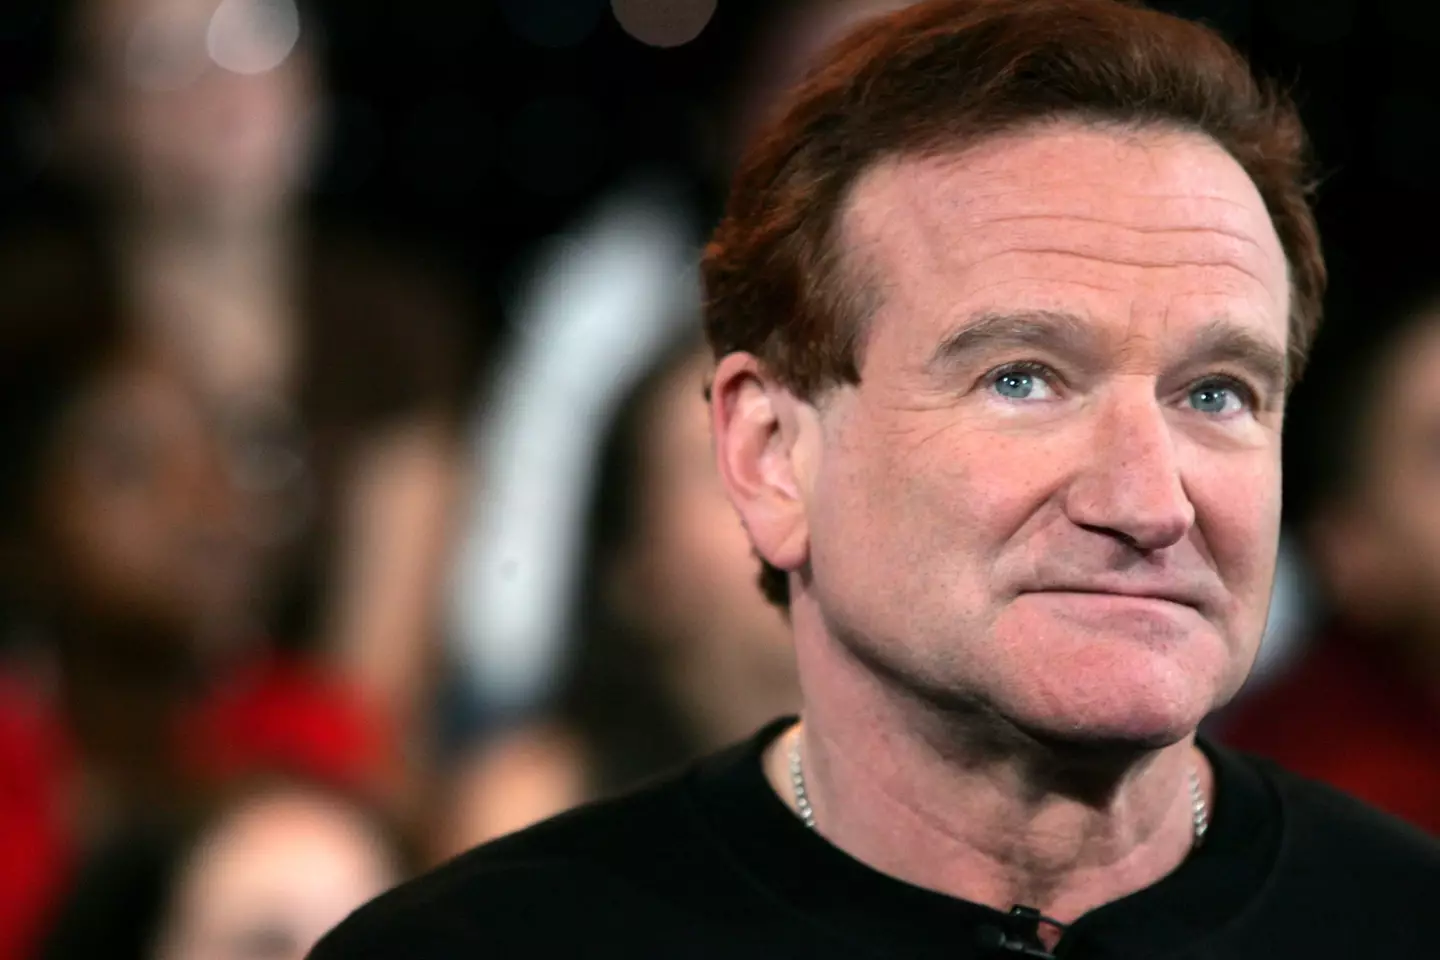 Robin Williams passed away in 2014 at the age of 63.